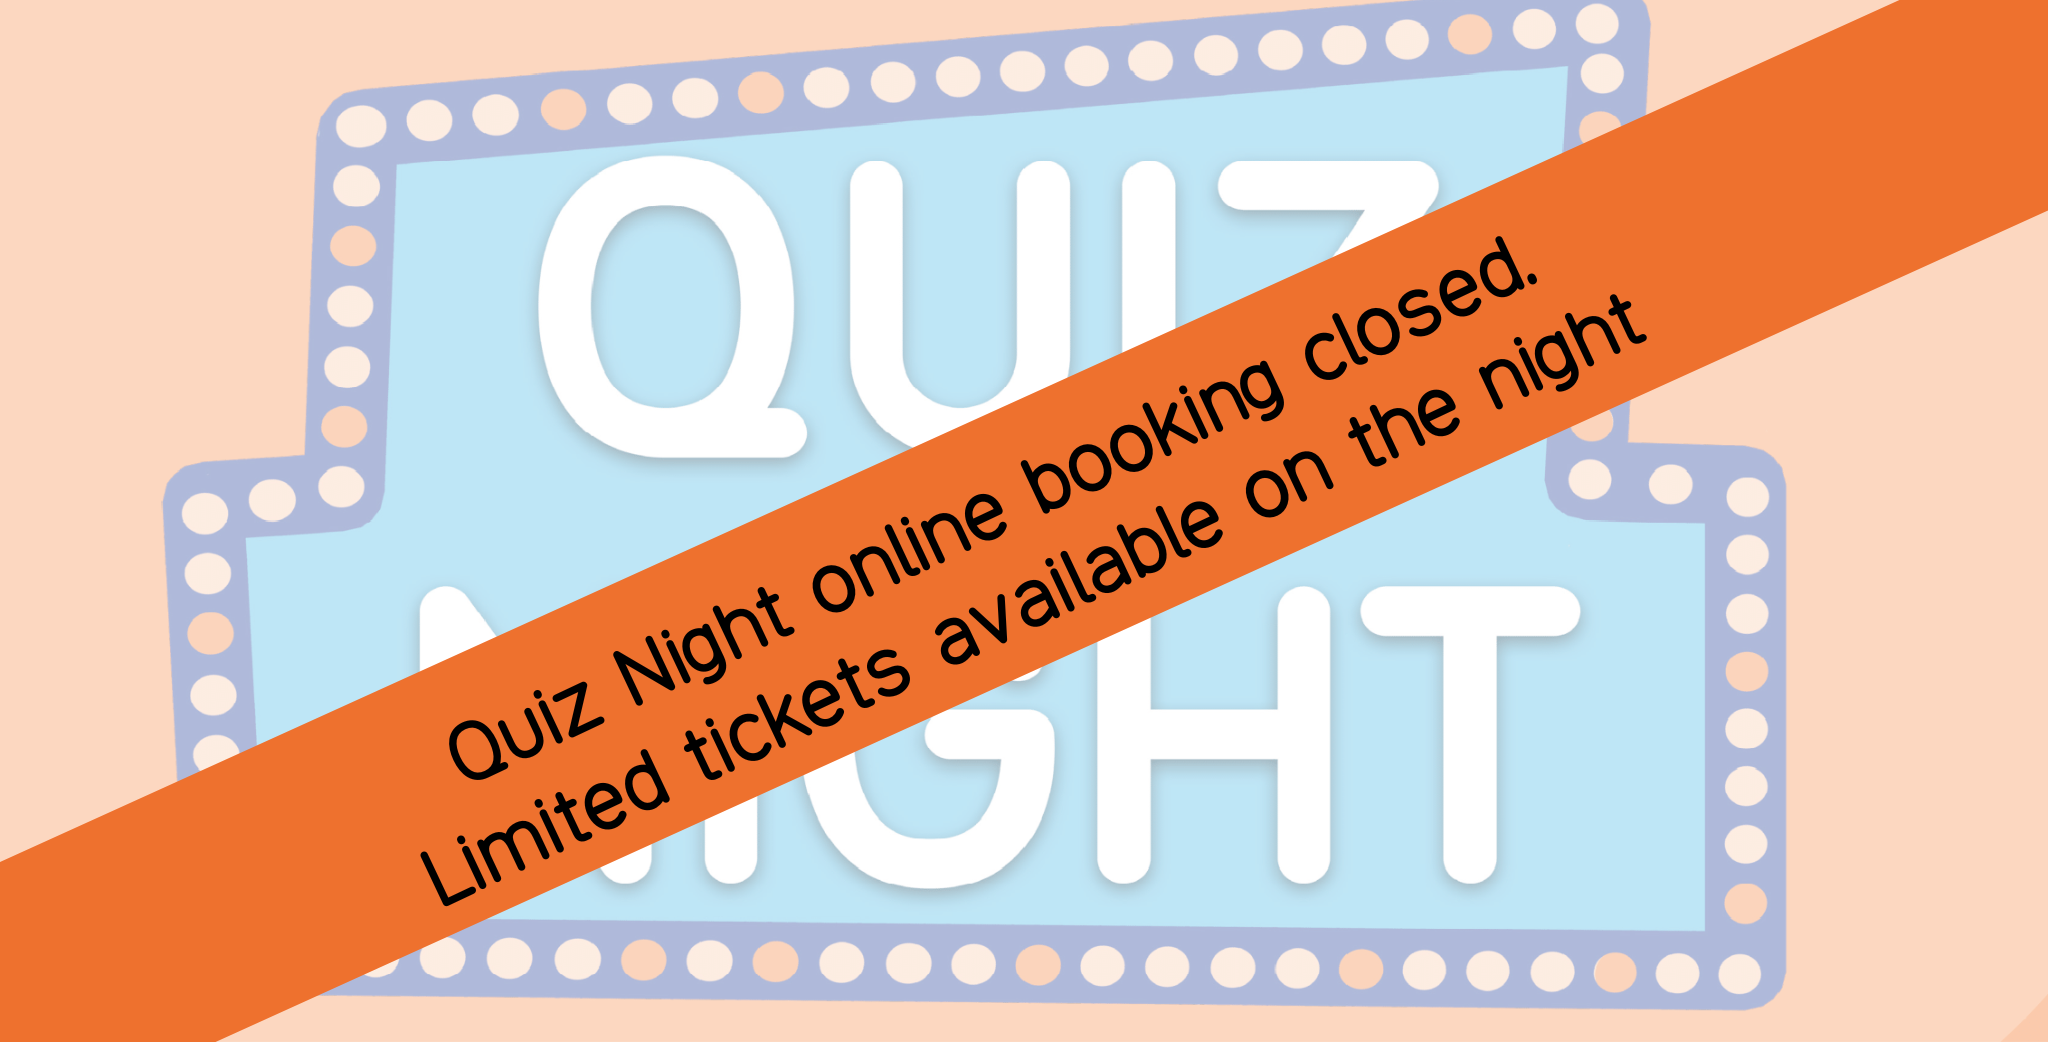 Quiz Night Online Book Closed. Limited Tickets Available On The Night